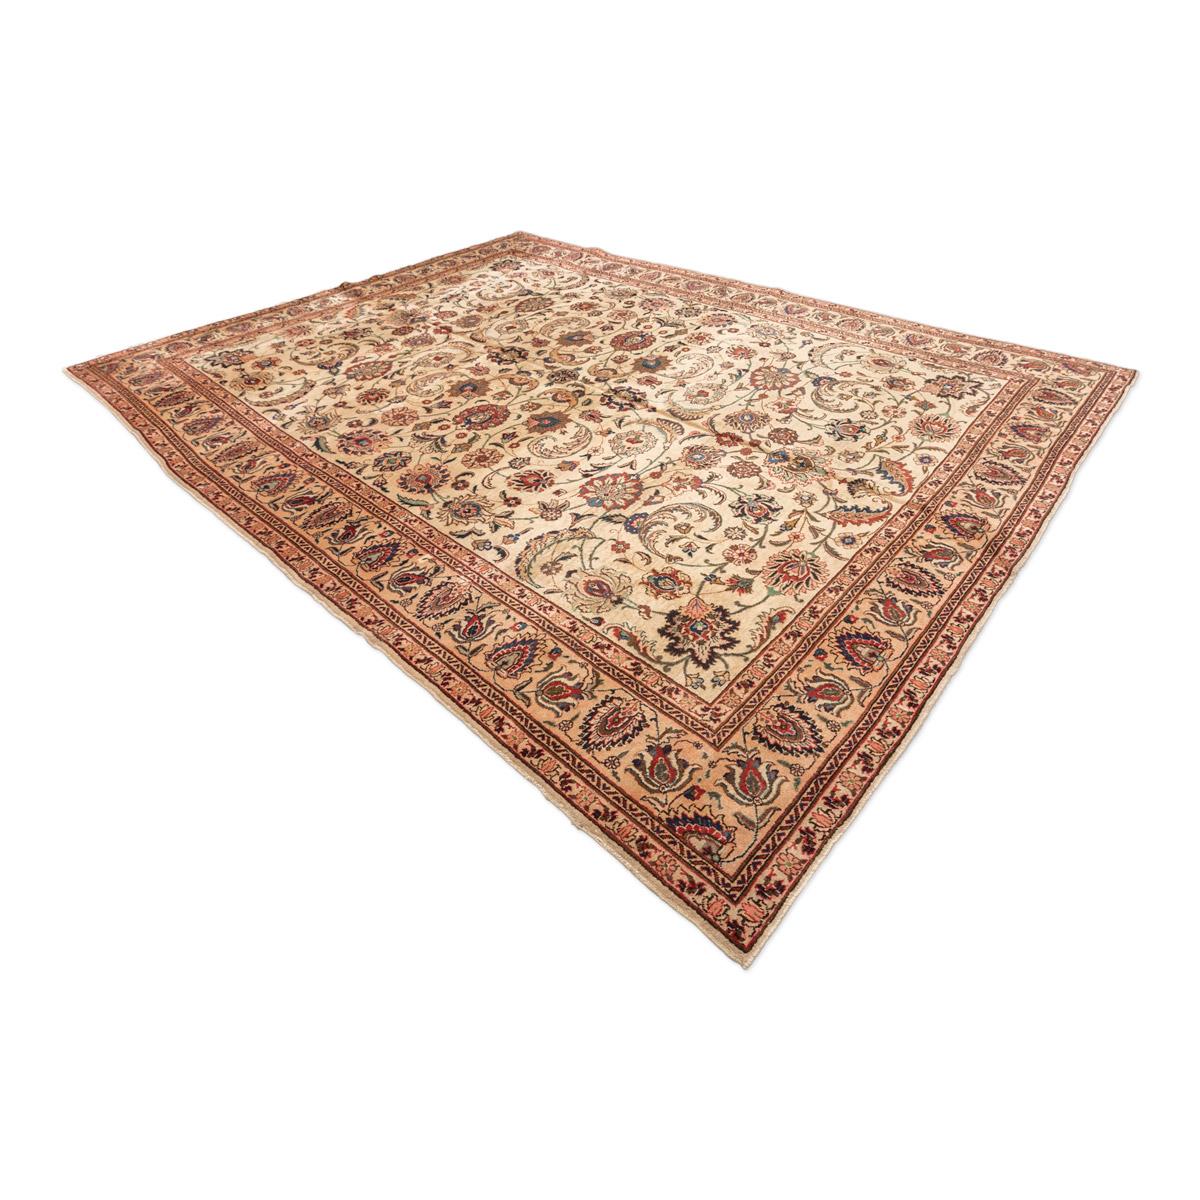 Classic design rug like from the city of Tabriz. Measures: 3.75 x 2.75 m
- Excellent piece characterized by the use of interlocking vanes and rosettes throughout the central field.
- Border work very similar to the field, which provides great